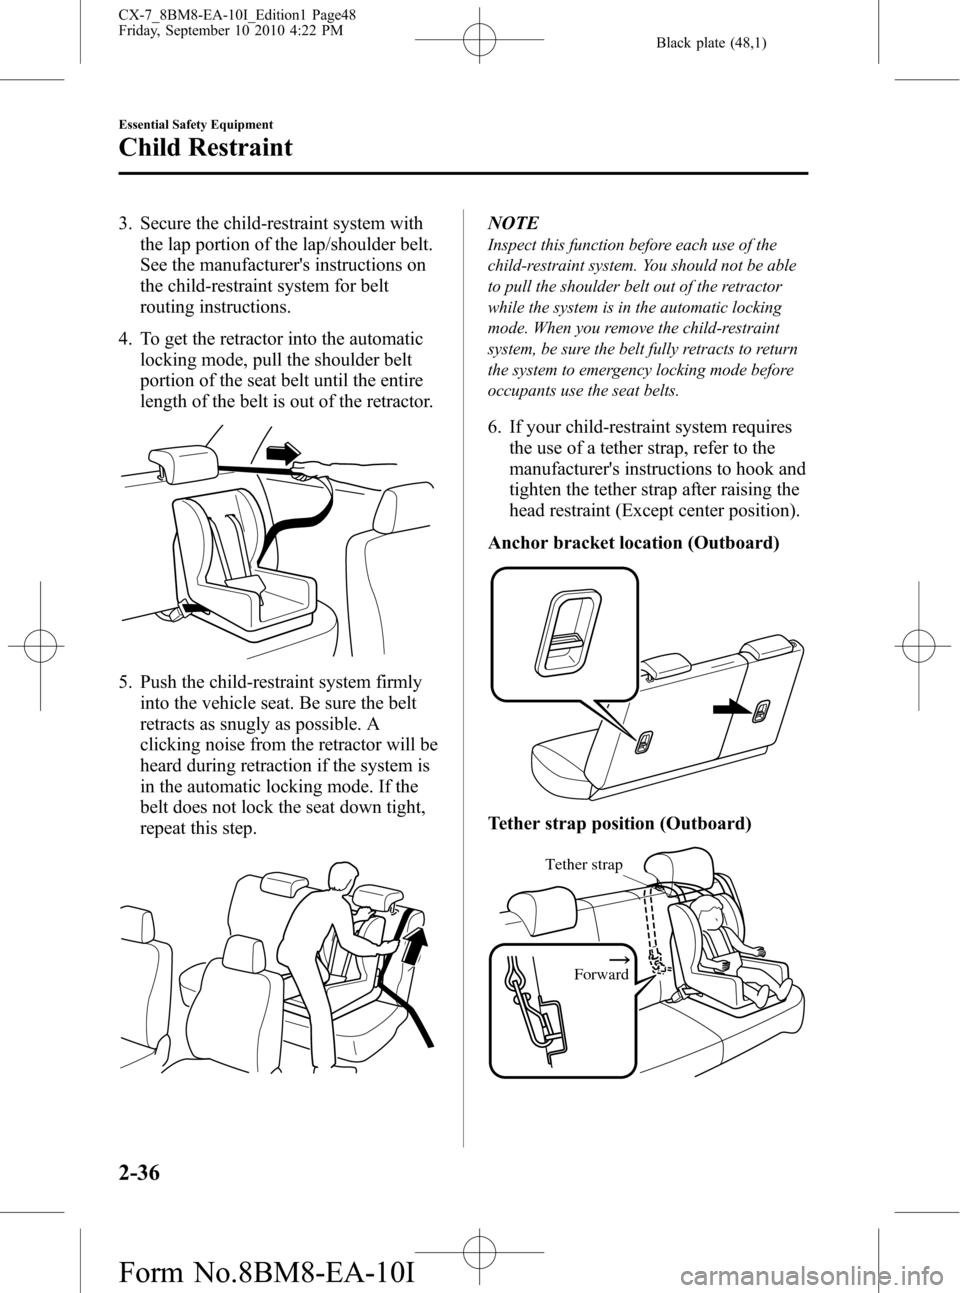 MAZDA MODEL CX-7 2011   (in English) Service Manual Black plate (48,1)
3. Secure the child-restraint system with
the lap portion of the lap/shoulder belt.
See the manufacturers instructions on
the child-restraint system for belt
routing instructions.
